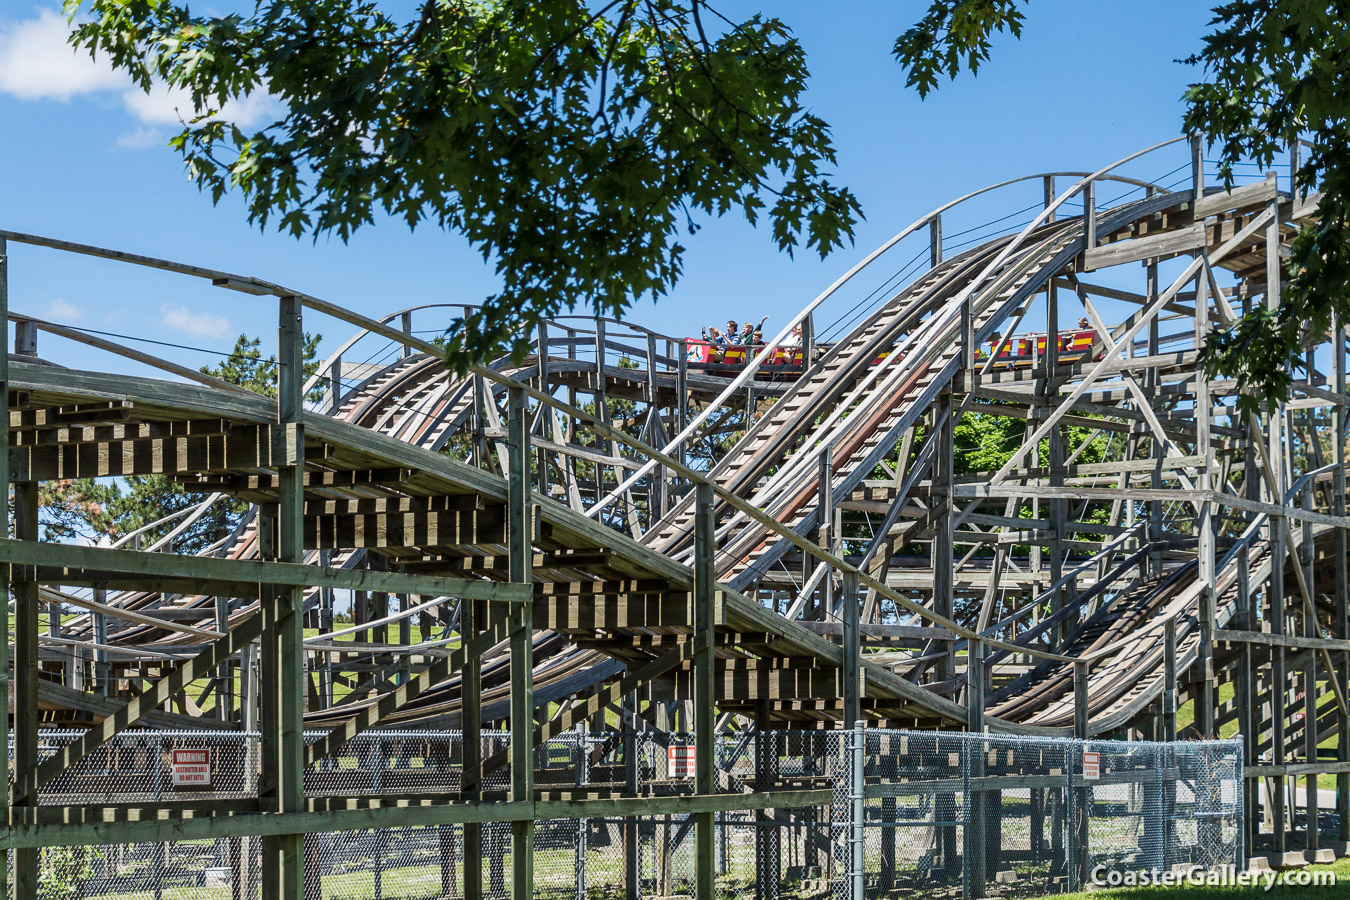 A wood roller coaster built by Curtis Summers, Canada's Wonderland, and Taft Broadcasting